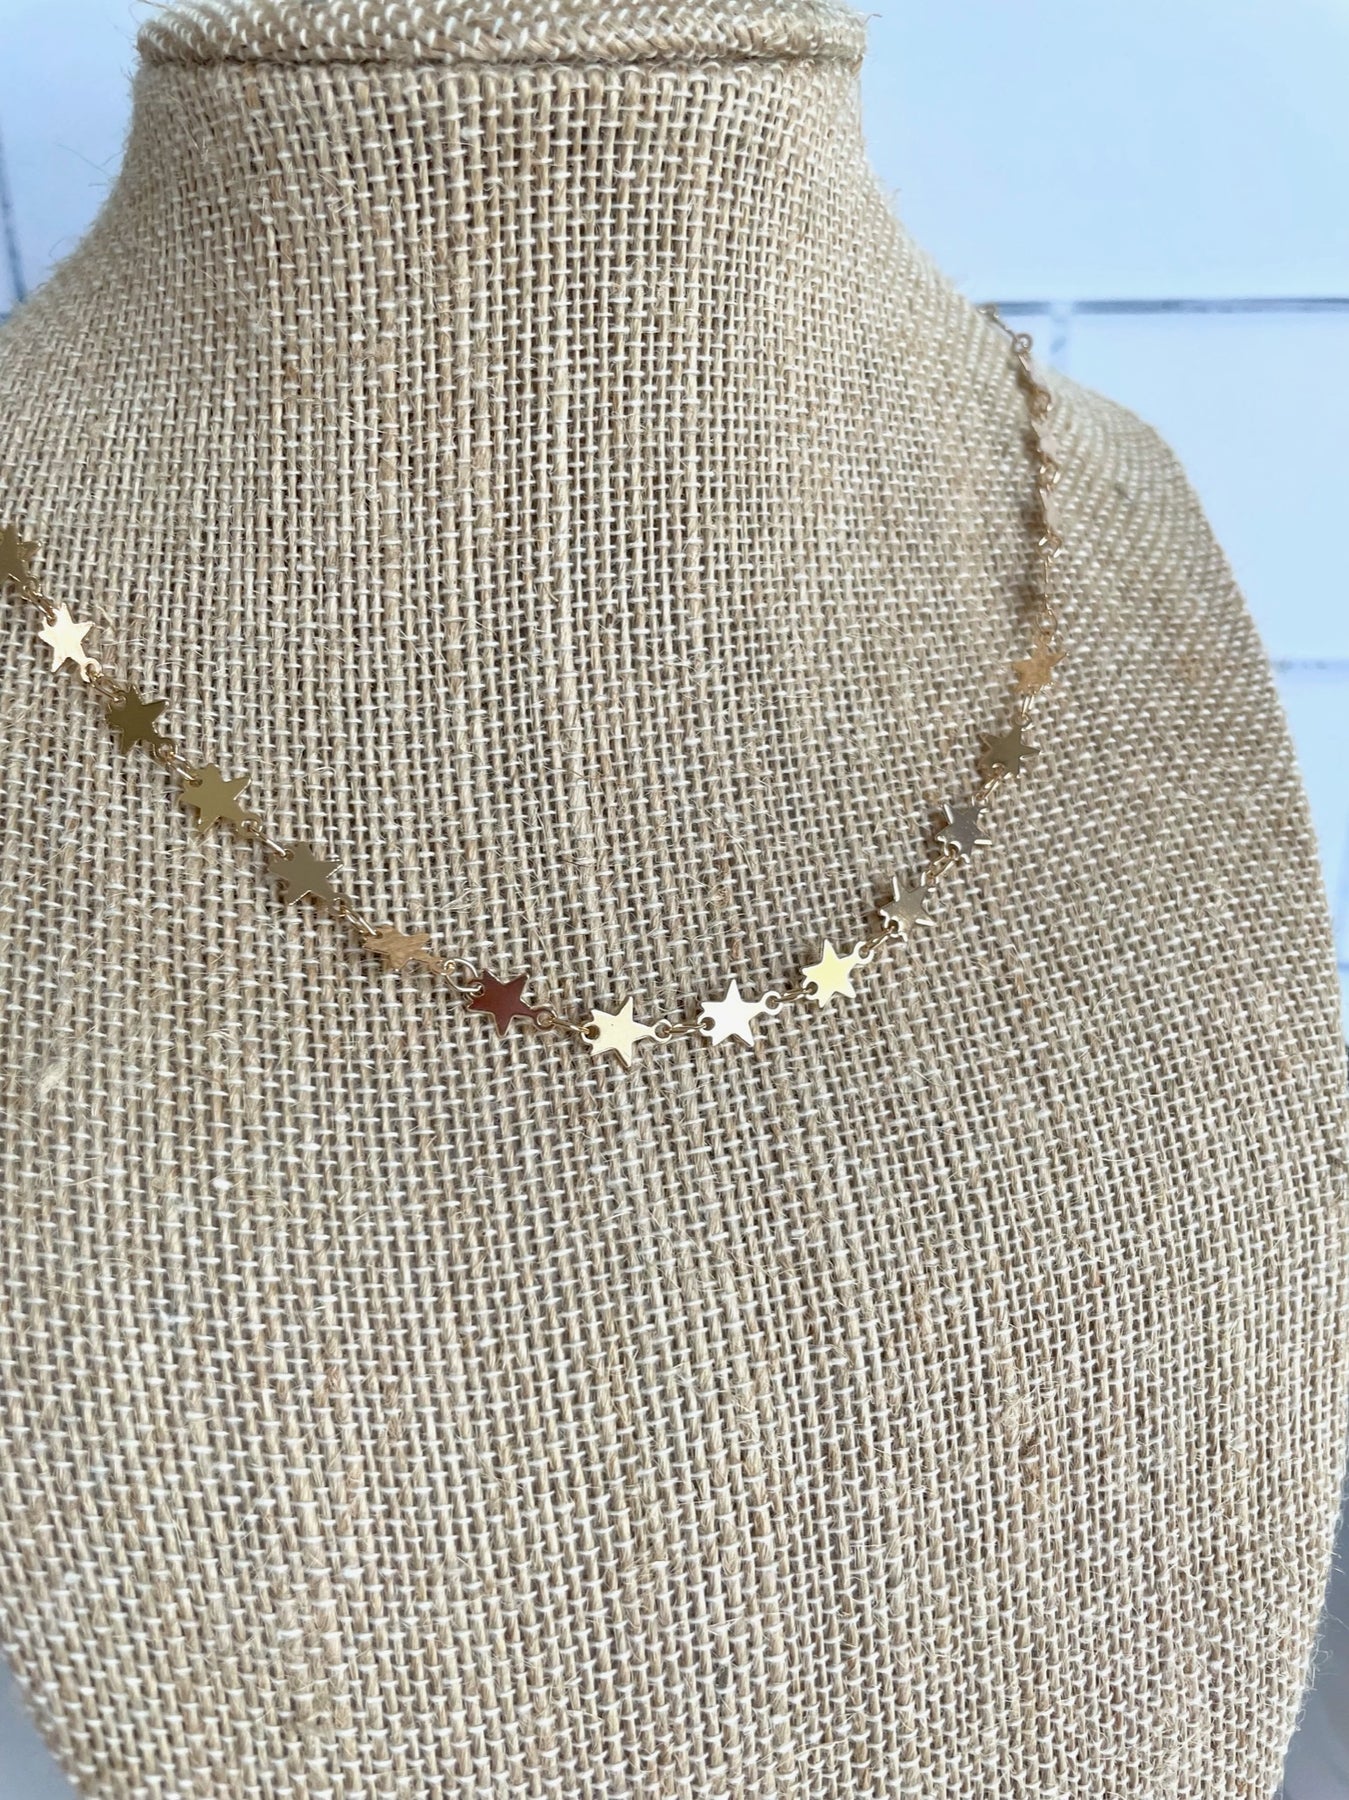 Sarah Cameron Necklace Outer Banks 3 Inspired Jewelry Choker SET OBX3 - Etsy